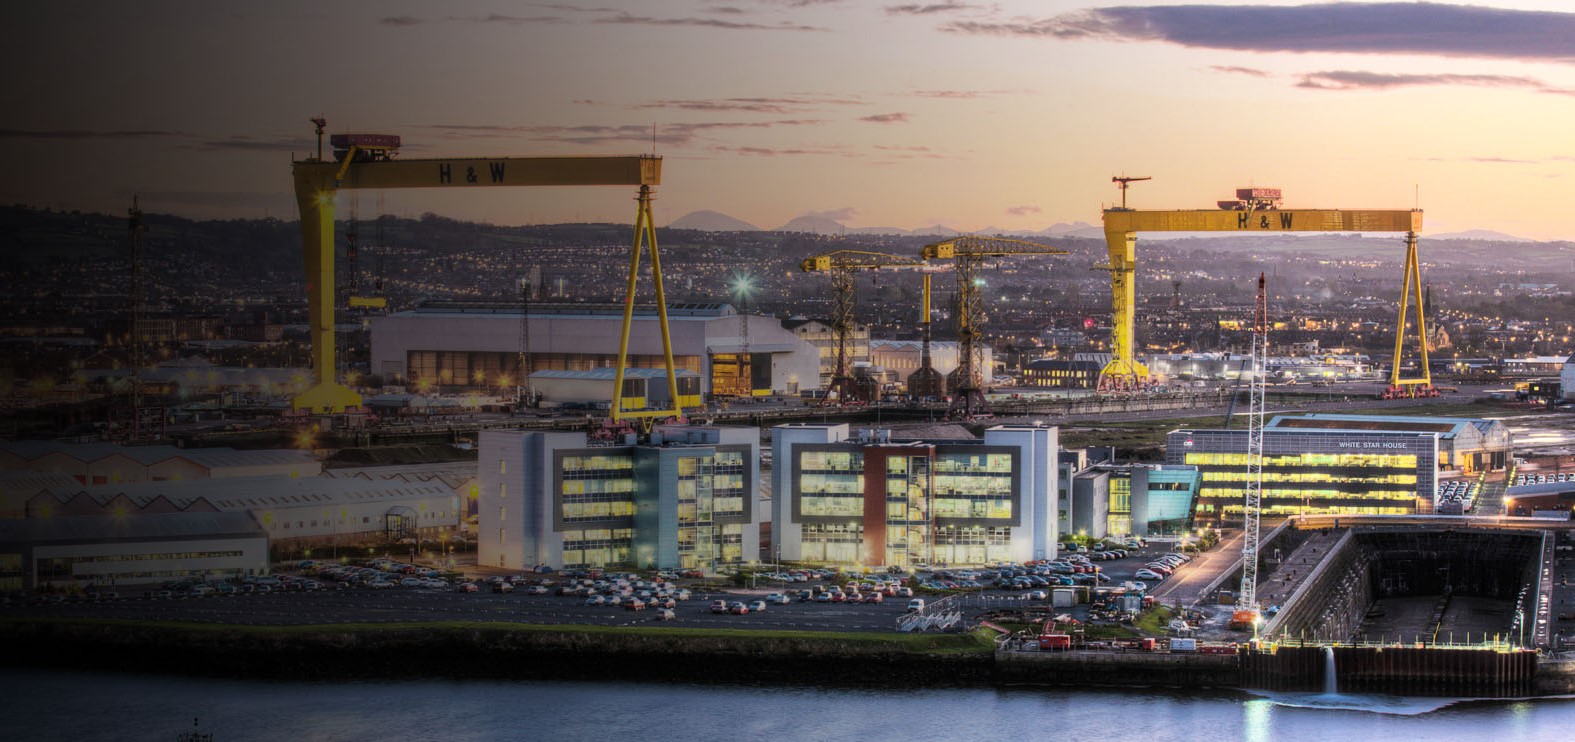 Aerial view of Belfast with Samson and Goliath cranes and shipyard in foreground and Mourne Mountains in distance